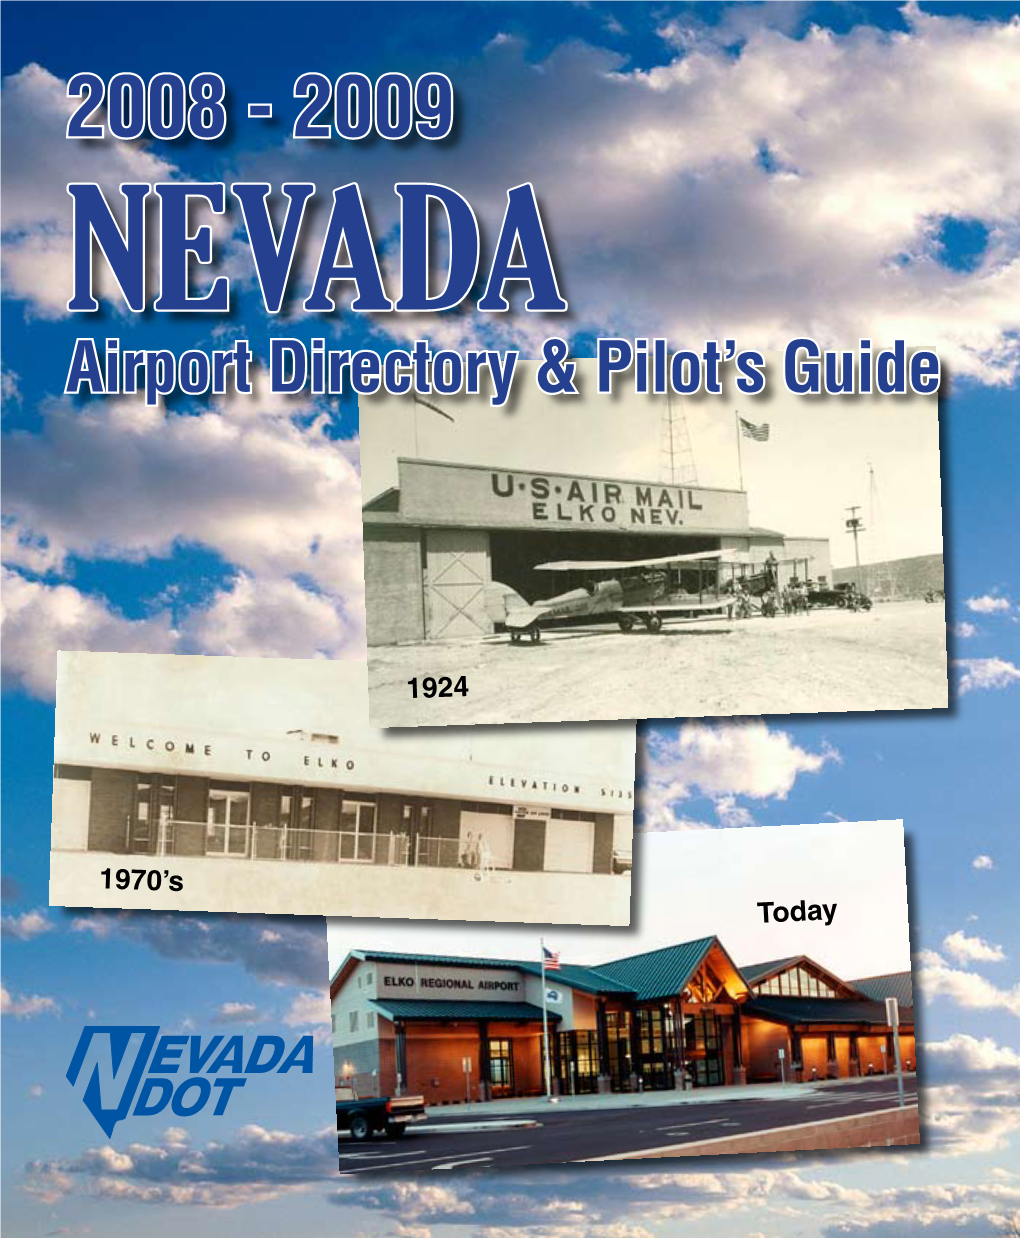 Airport Directory & Pilot's Guide